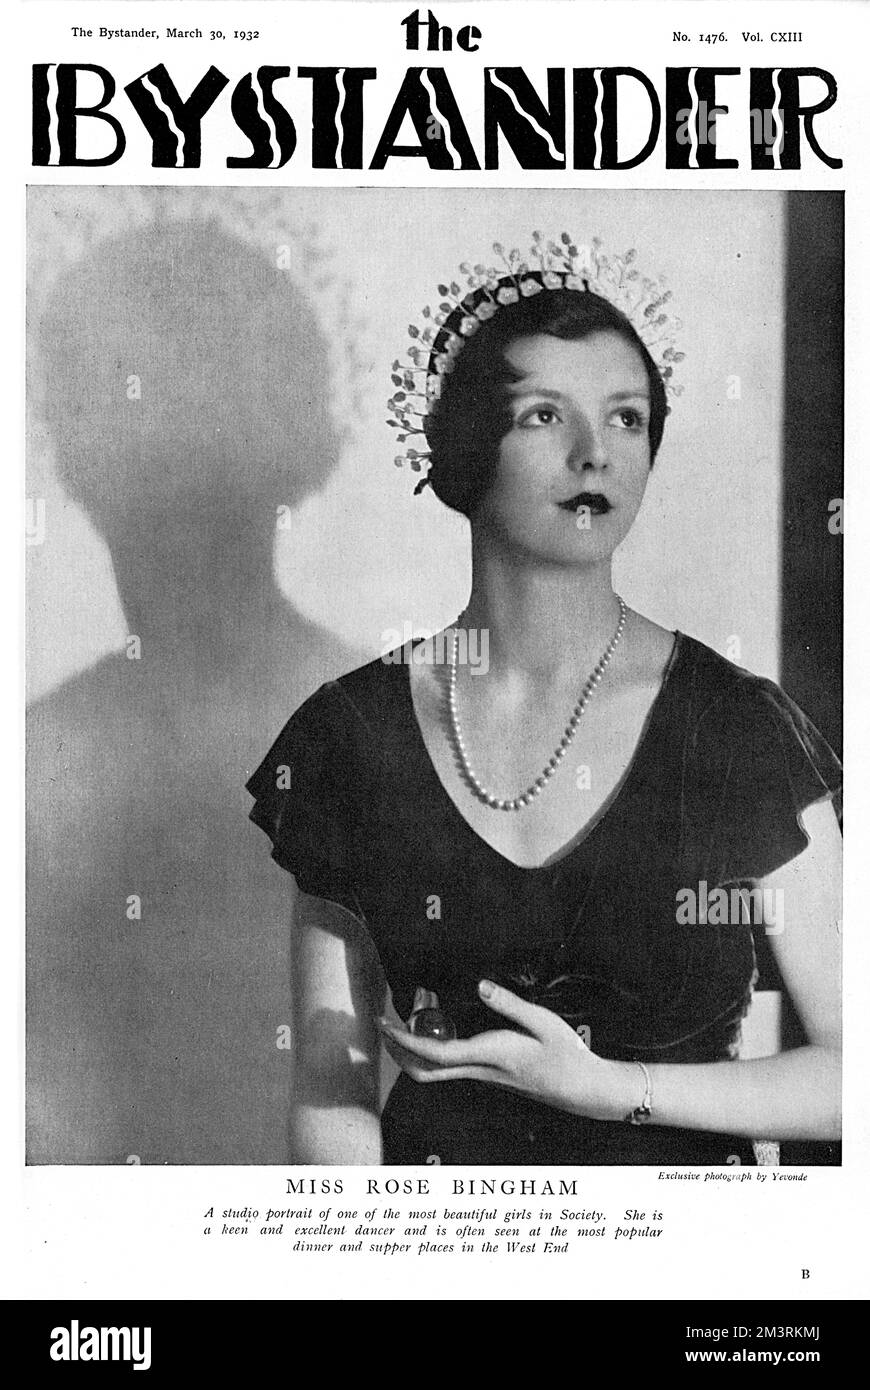 Renowned society beauty Miss Rose Bingham, daughter of Lady Rosabelle Brand and later to become the Countess of Warwick, pictured on the front cover of The Bystander magazine in 1932 in a photograph by Madame Yevonde.  The magazine describes here as &quot;one of the most beautiful girls in Society.  She is a keen and excellent dancer and is often seen at the most popular dinner and supper places in the West End.&quot;  Interestingly, turning the page over, there is a portrait of Miss Margaret Whigham who had recently become engaged to the Earl of Warwick.  Margaret broke off the engagement sho Stock Photo